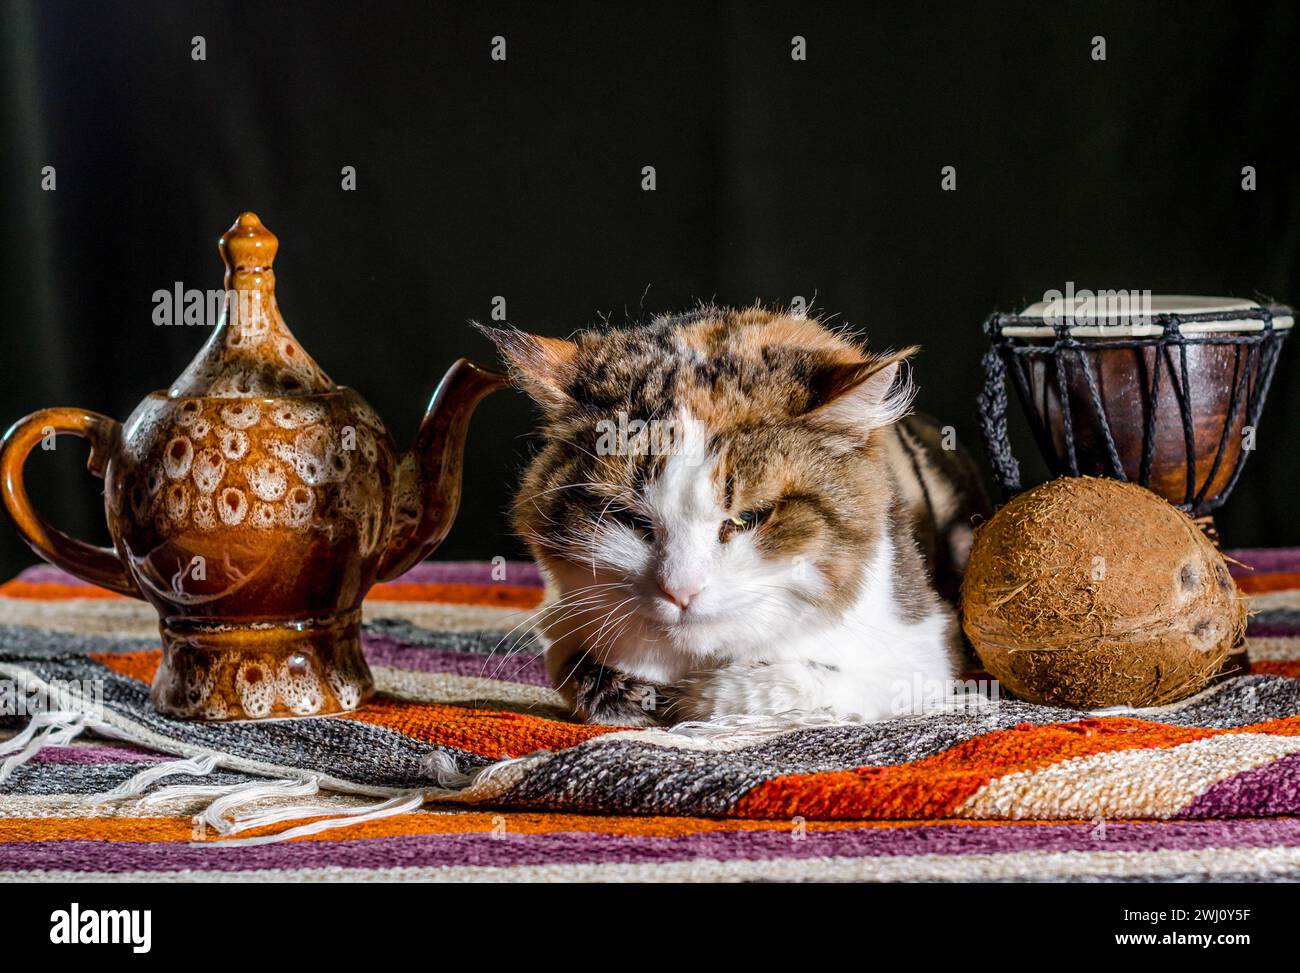 Dissatisfied cat with a kettle drum djembe and coconut on a colorful carpet Stock Photo